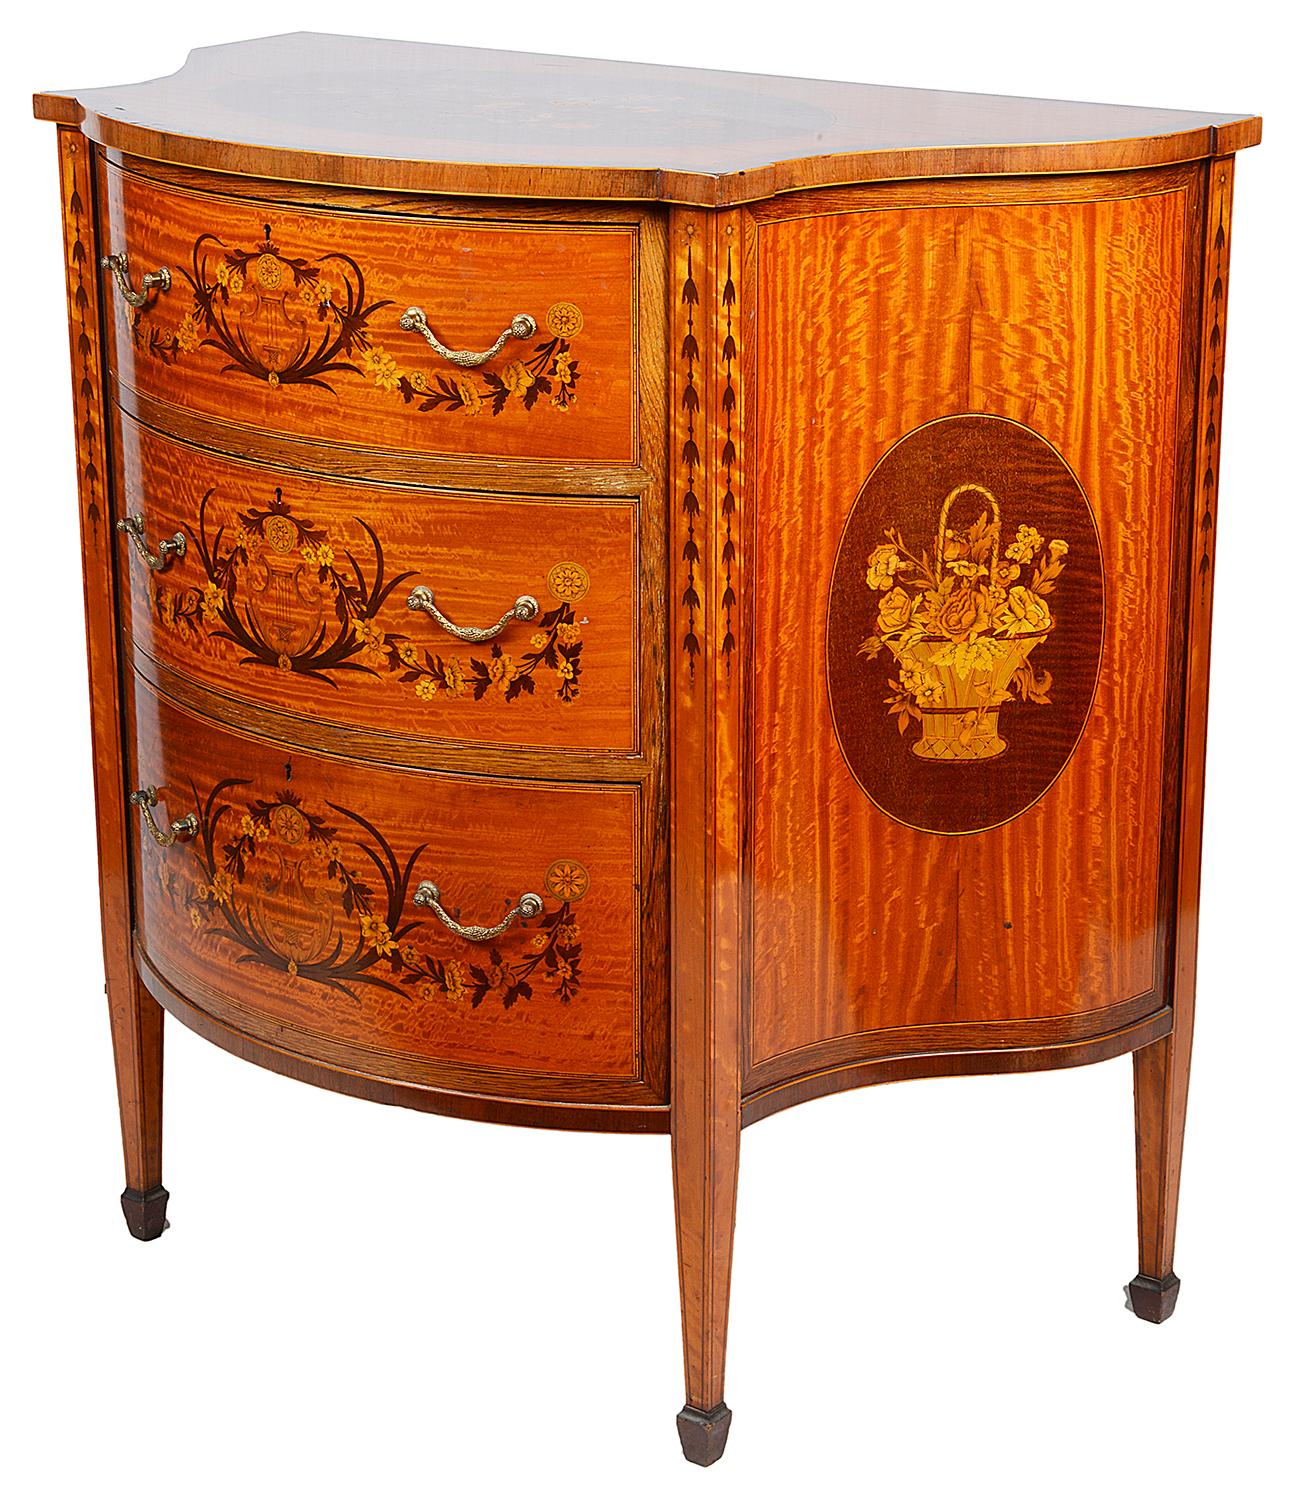 A very good quality late 19th century satinwood, Sheraton revival bow fronted commode. Having wonderful floral inlaid decoration to the oval panel on top, the three, oval inlaid panels with baskets of flowers to the sides and raised on square